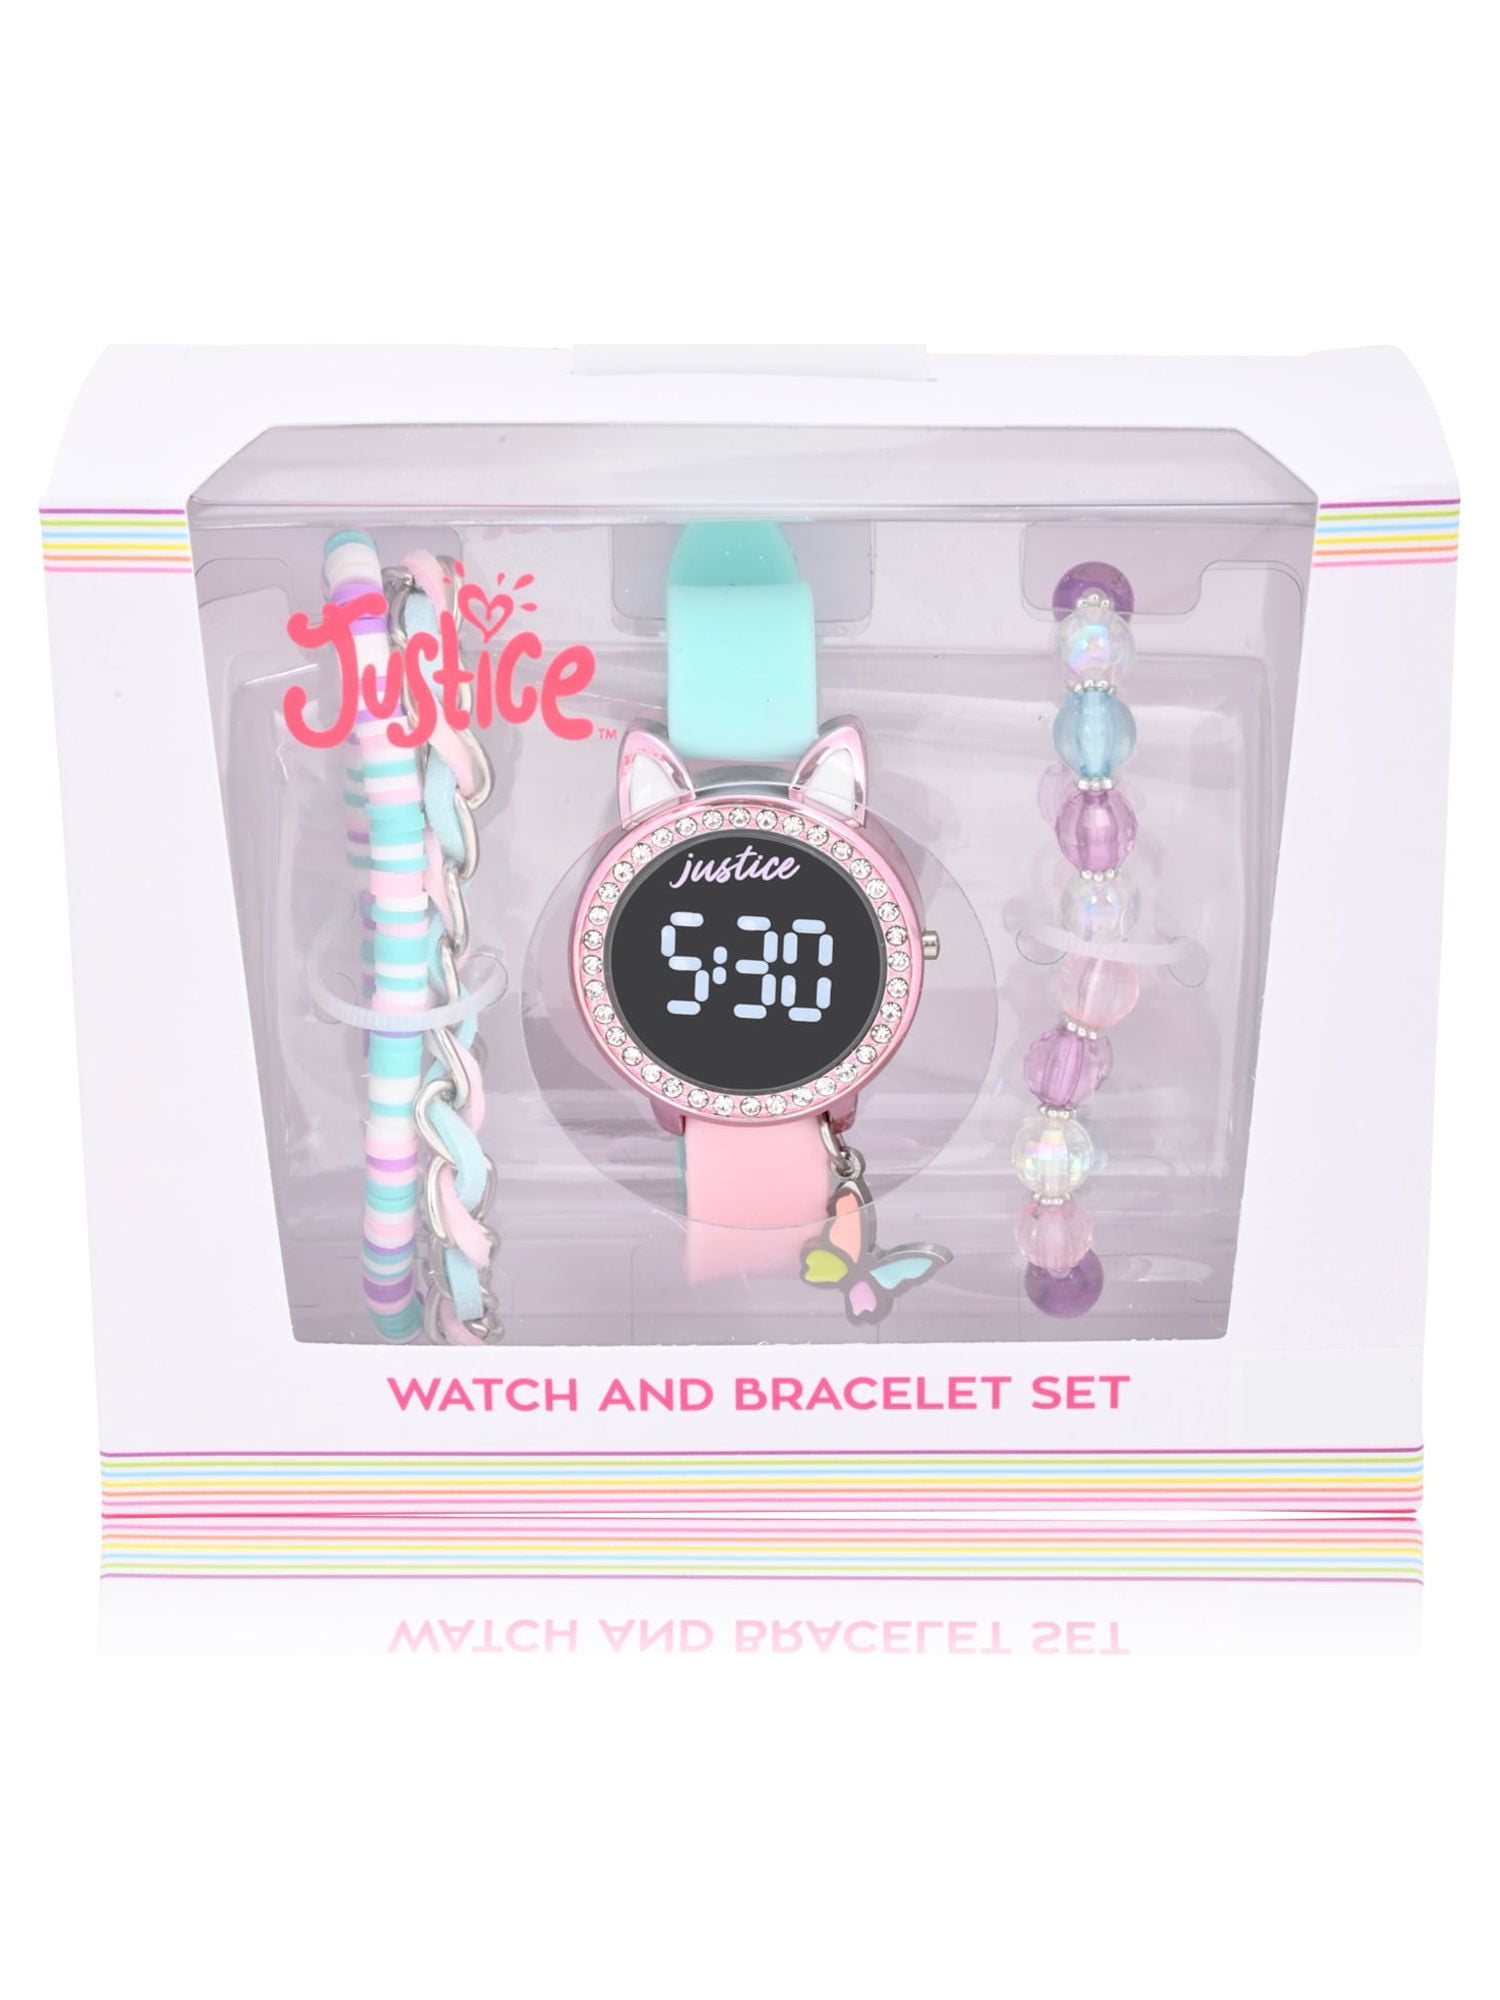 Set Jewelry, Matching Icy Bracelets And Watches - Helloice